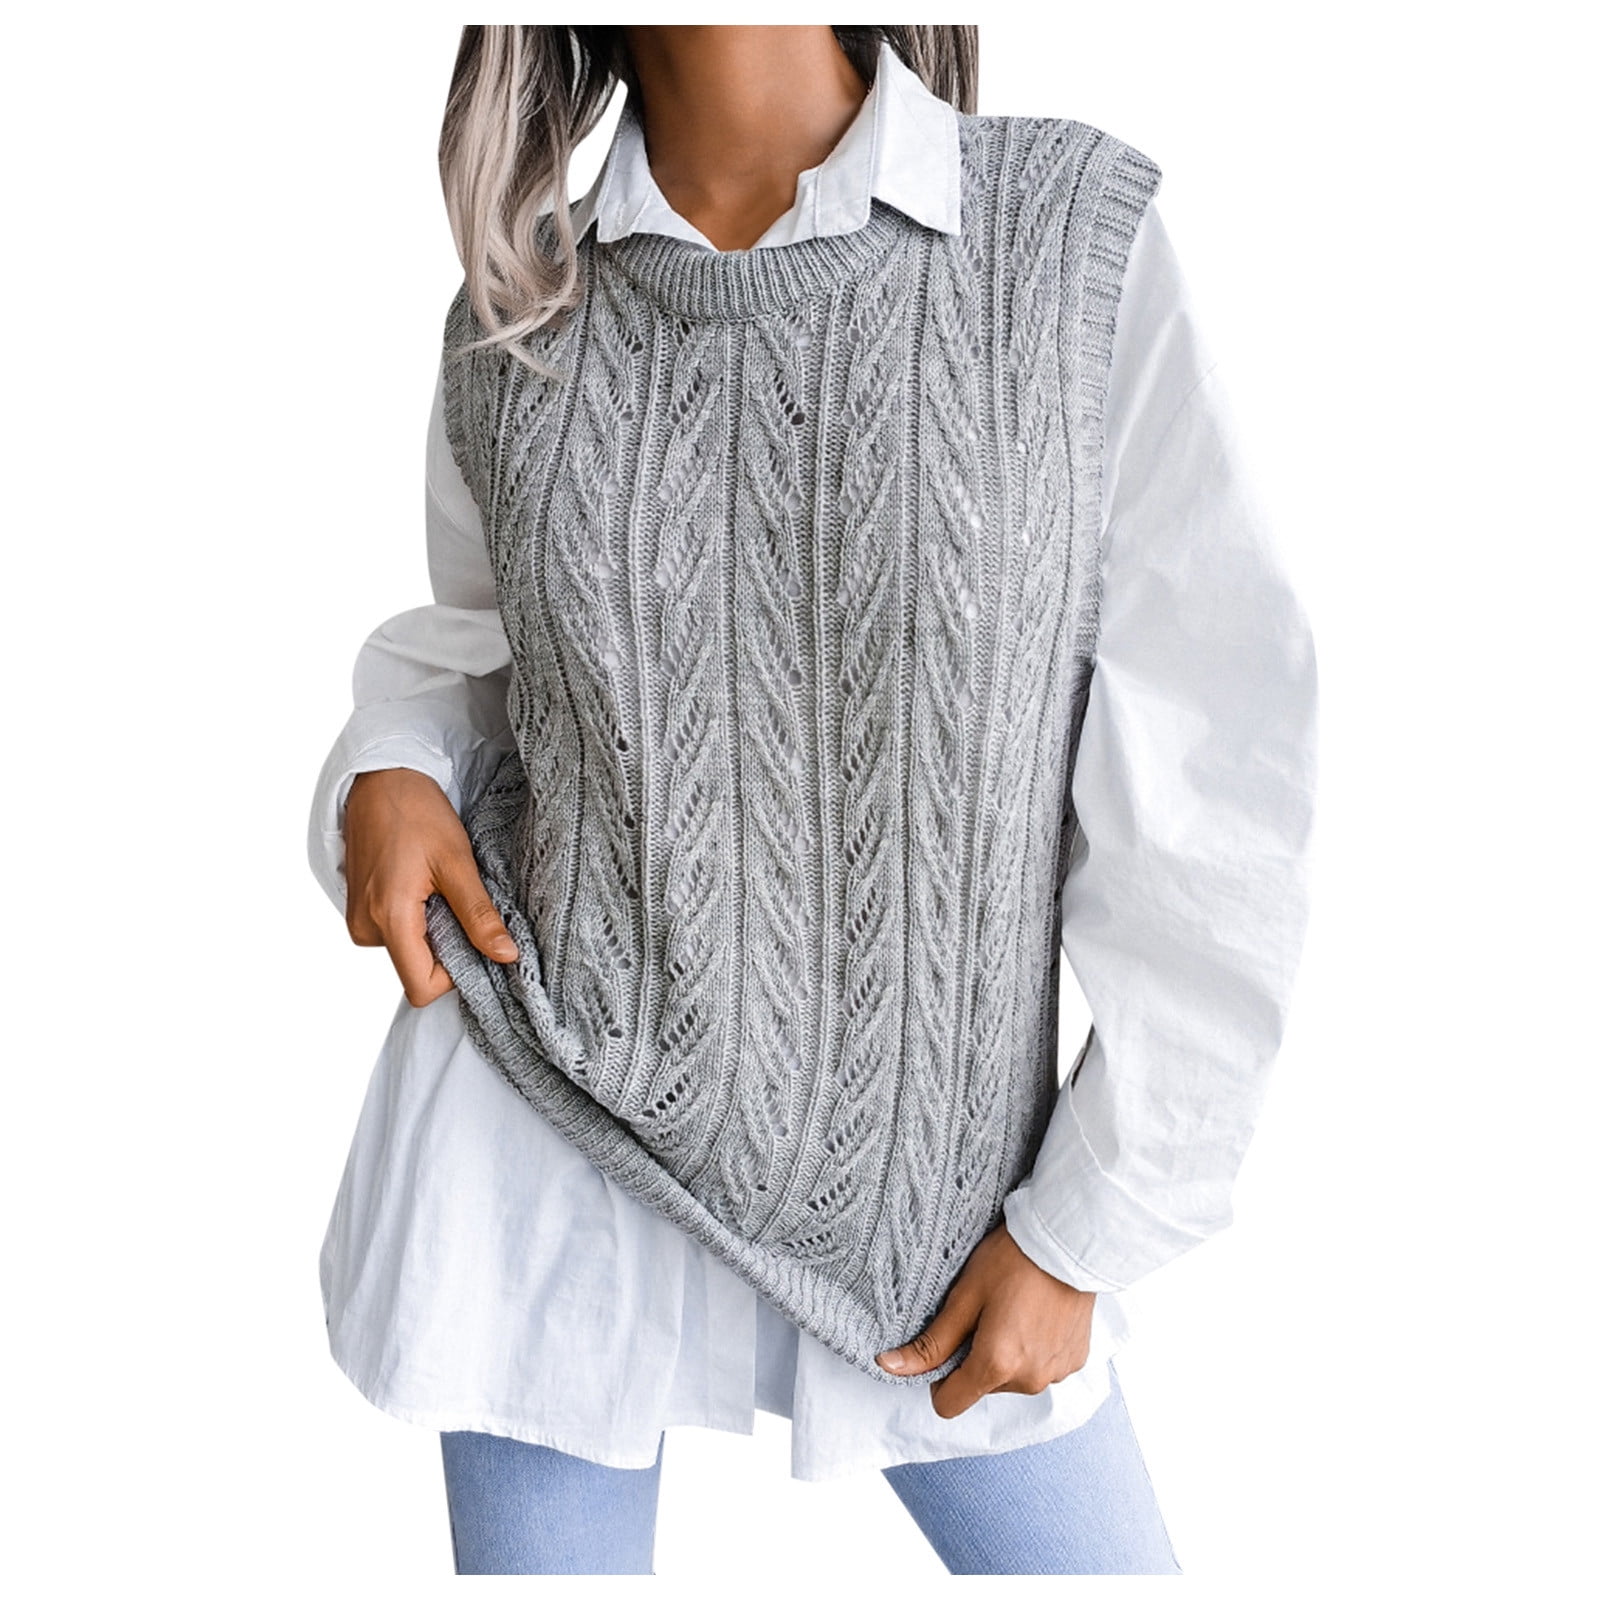 Womens Fall Sweaters Sleeveless Sweater Vests Tops Solid Print Grey L ...